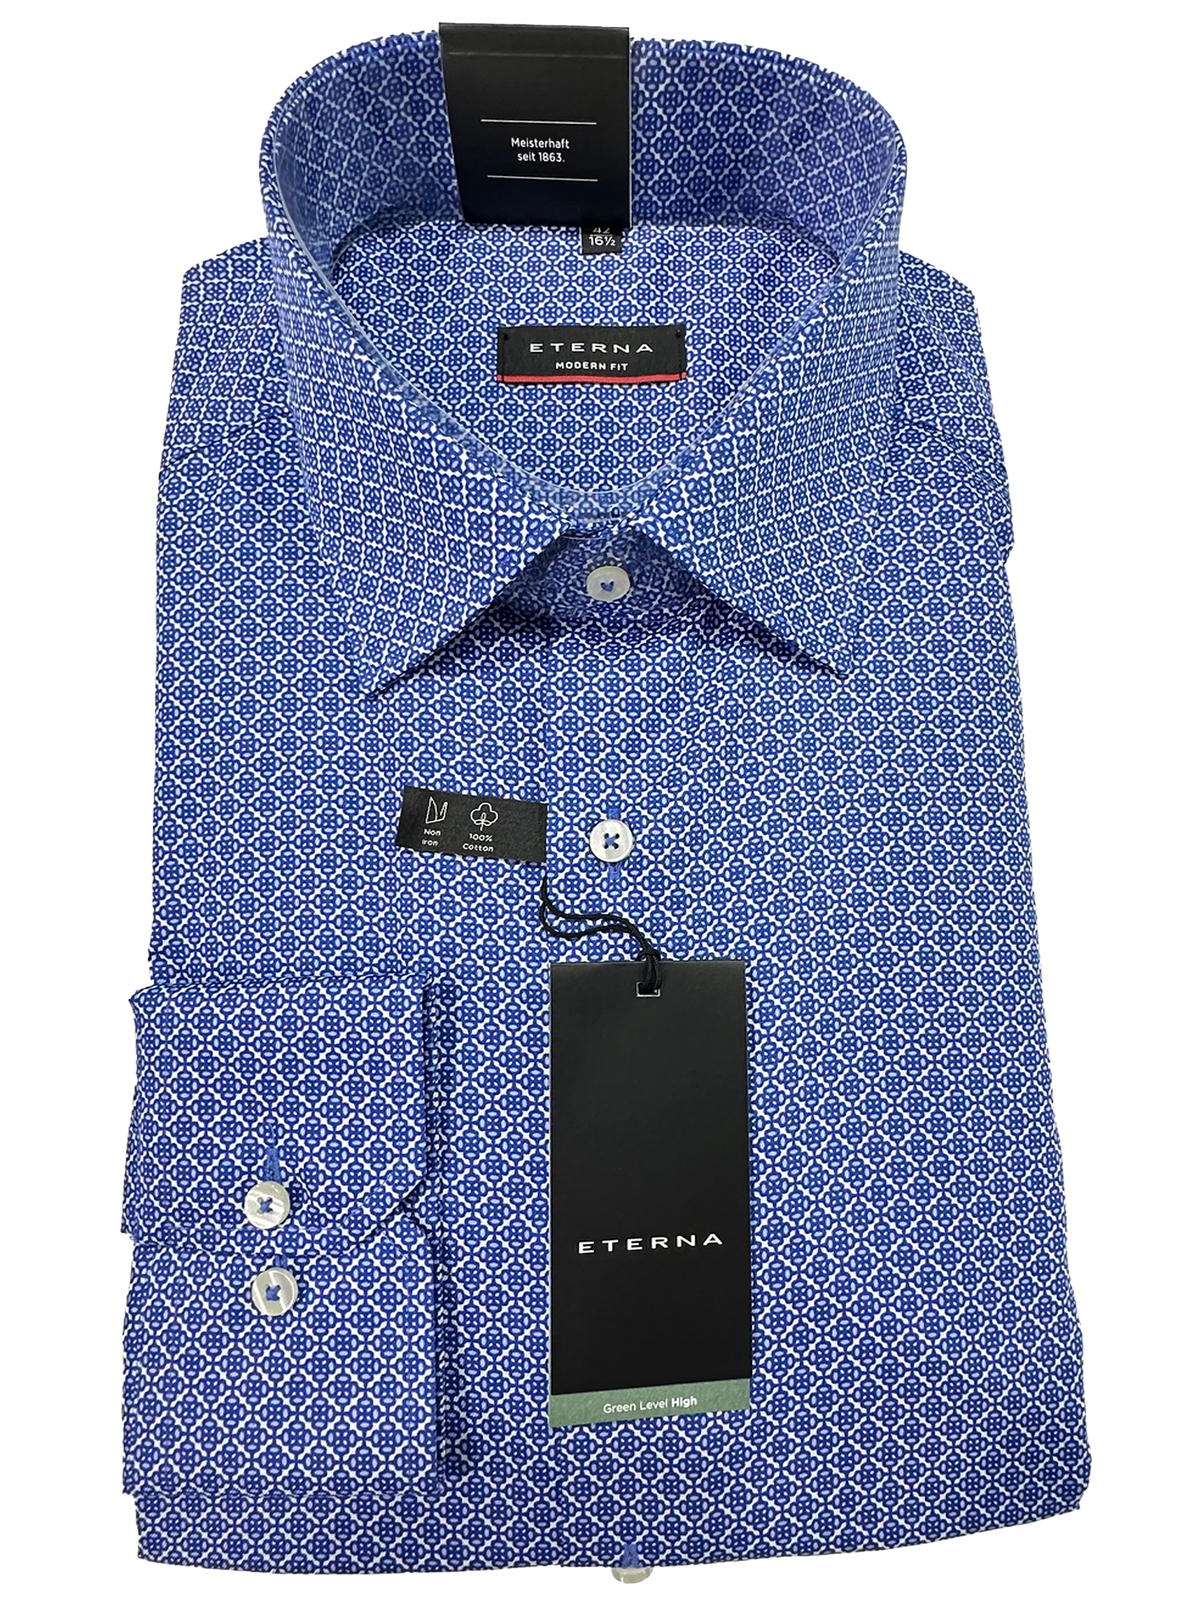 – Page – Harrys Collection for 2 Eterna Menswear Shirts